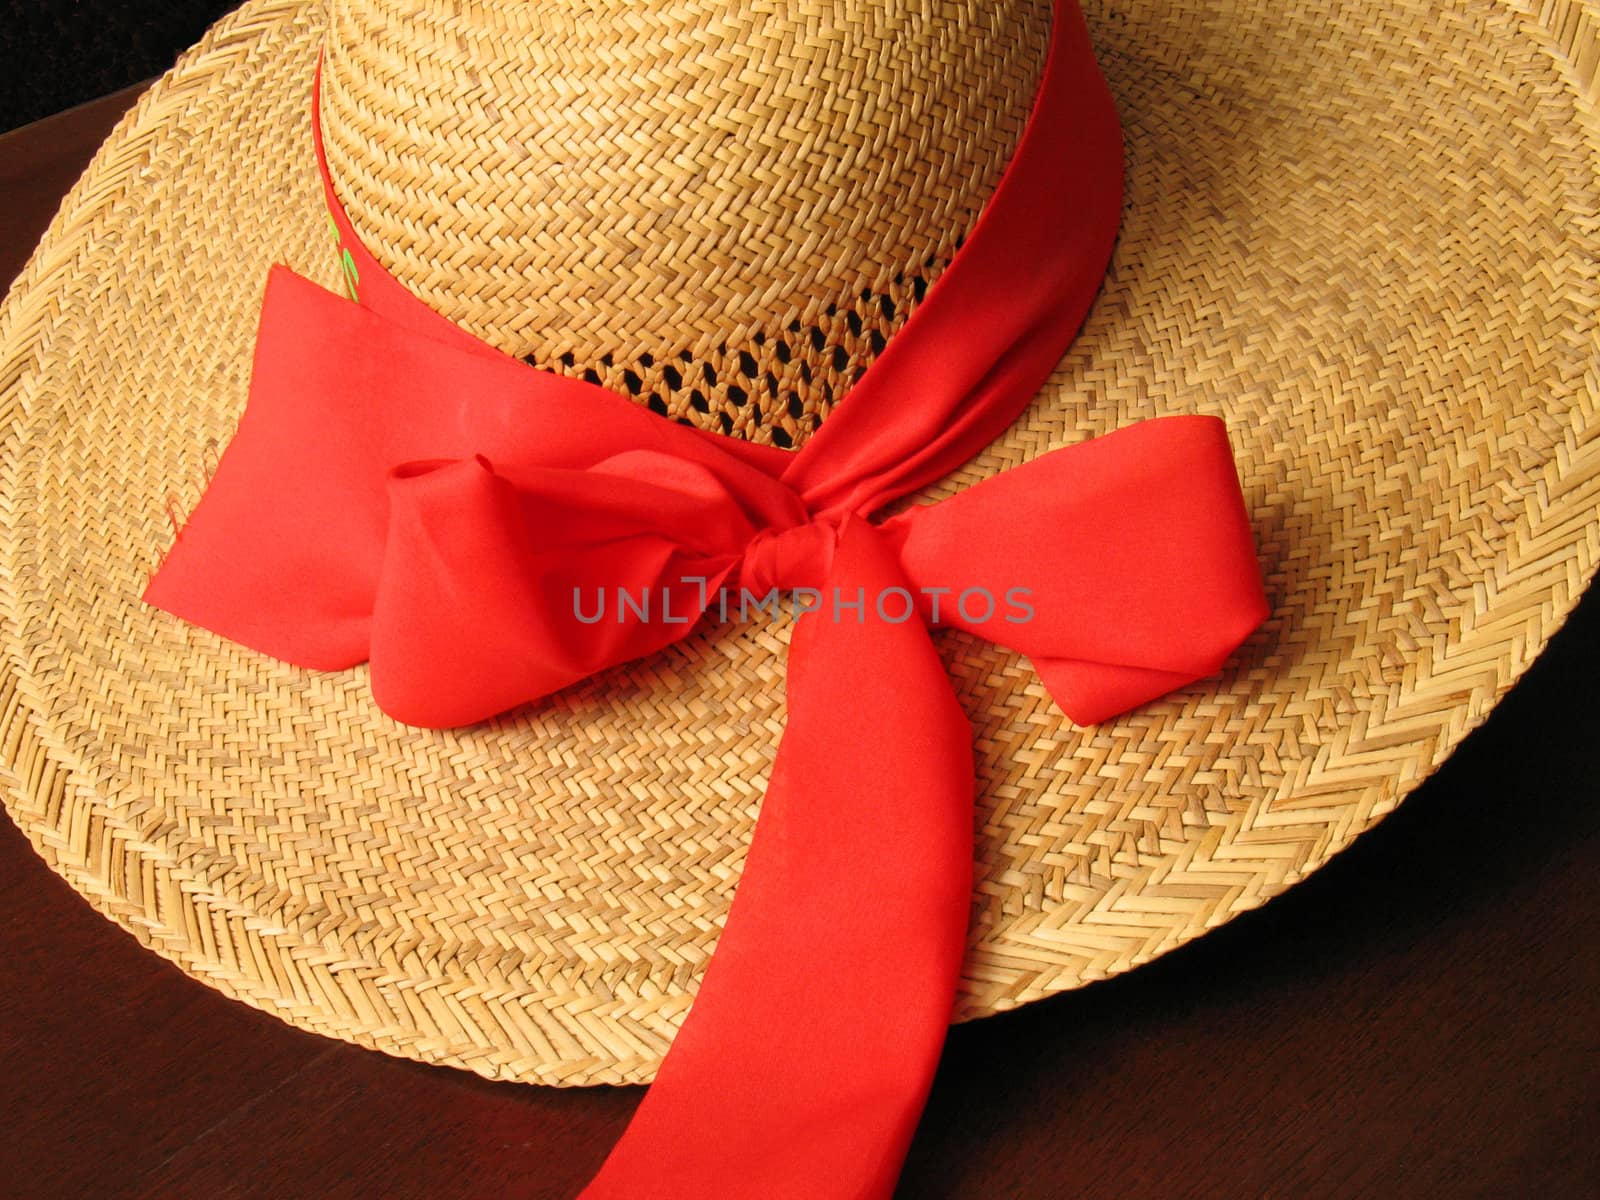 straw hat with red bow on dark background